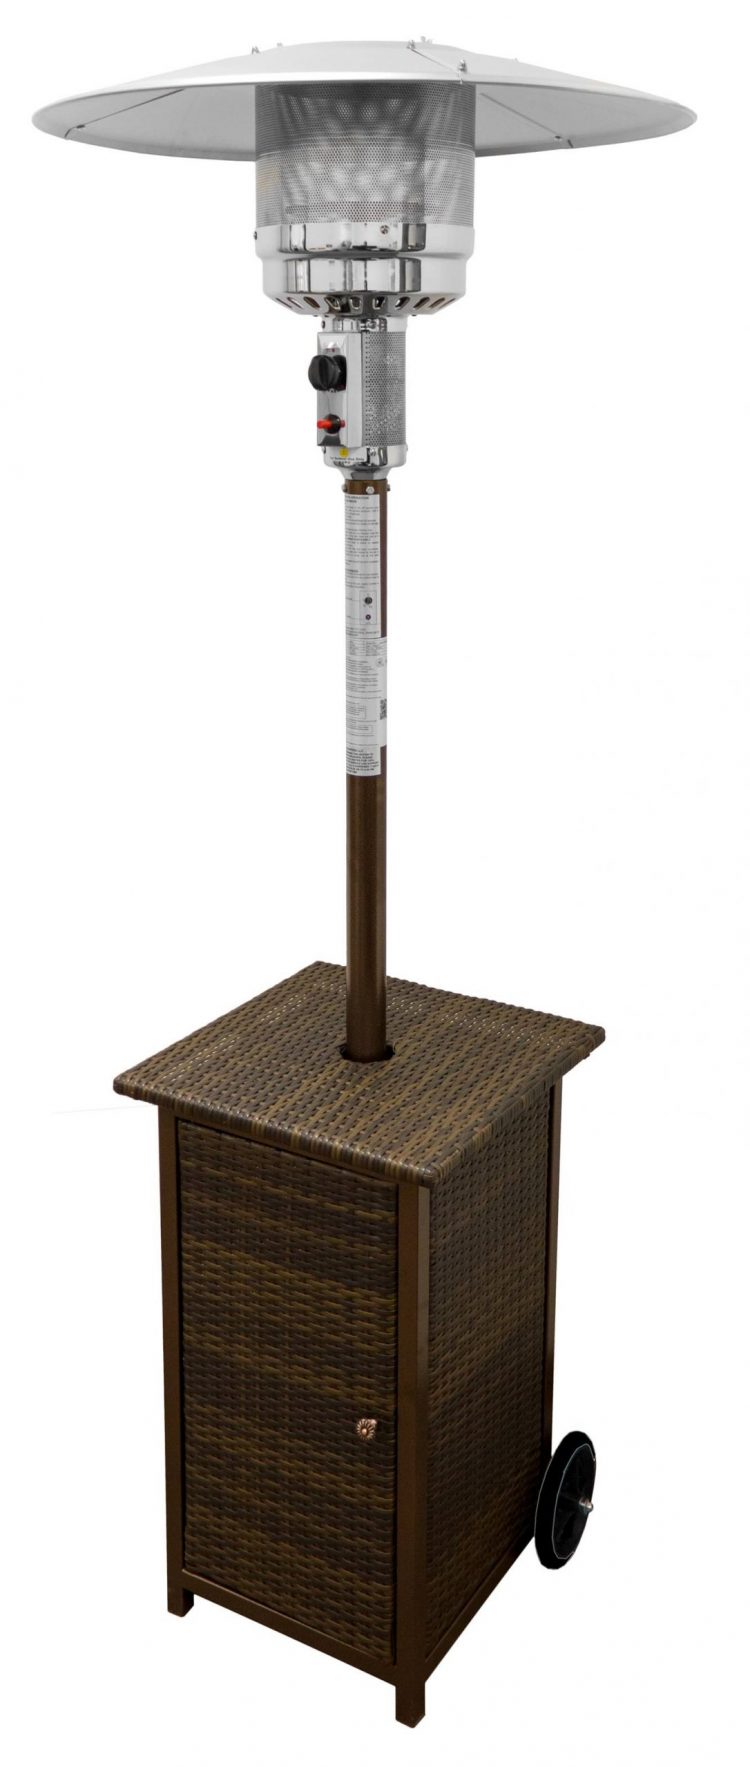 87″ Tall Square Wicker Patio Heater with Table 1